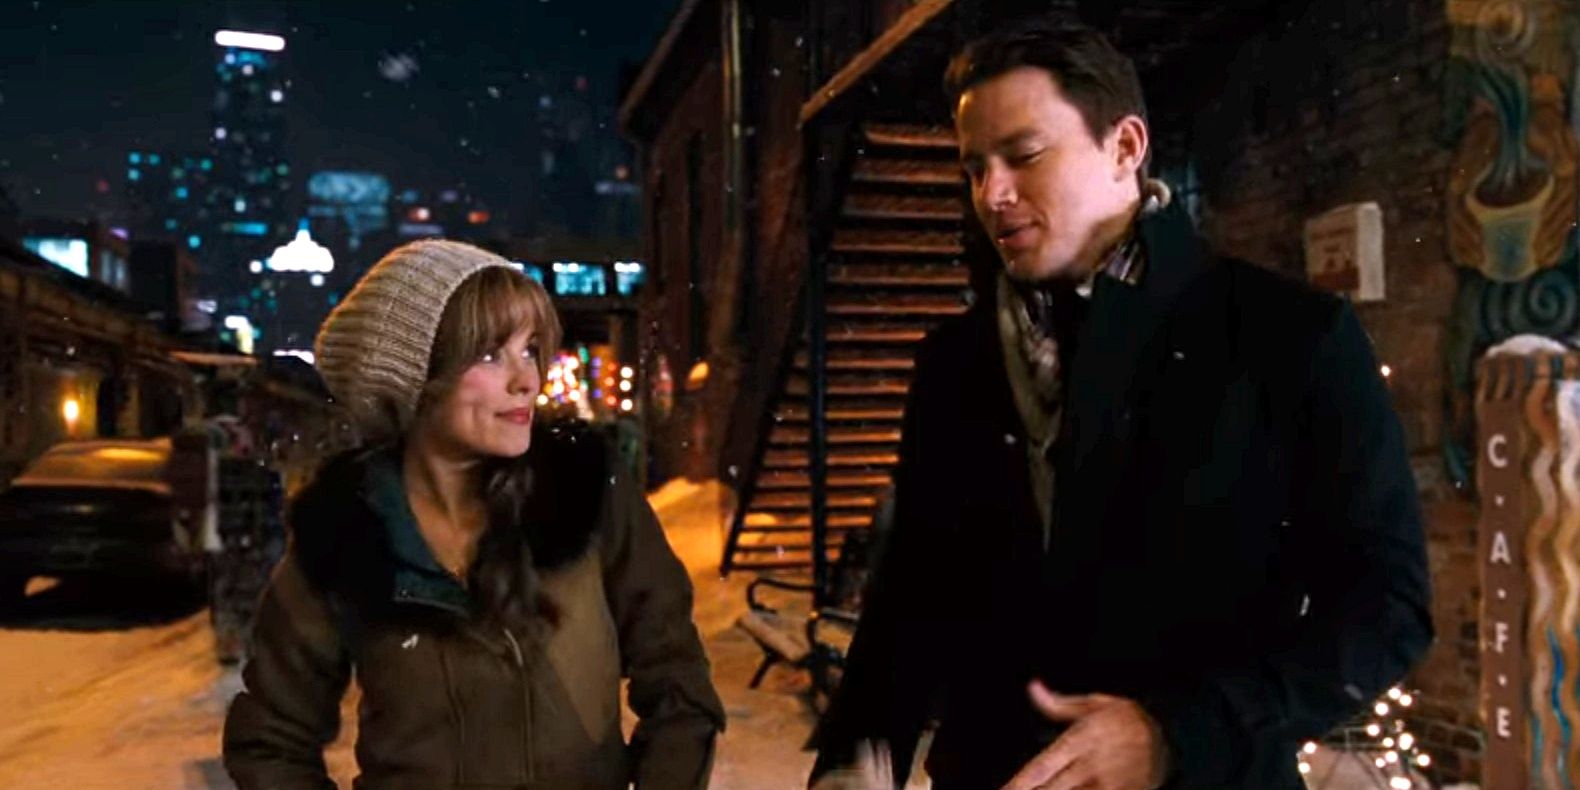 Rachel McAdams as Paige Collins and Channing Tatum as Leo Collins in The Vow.